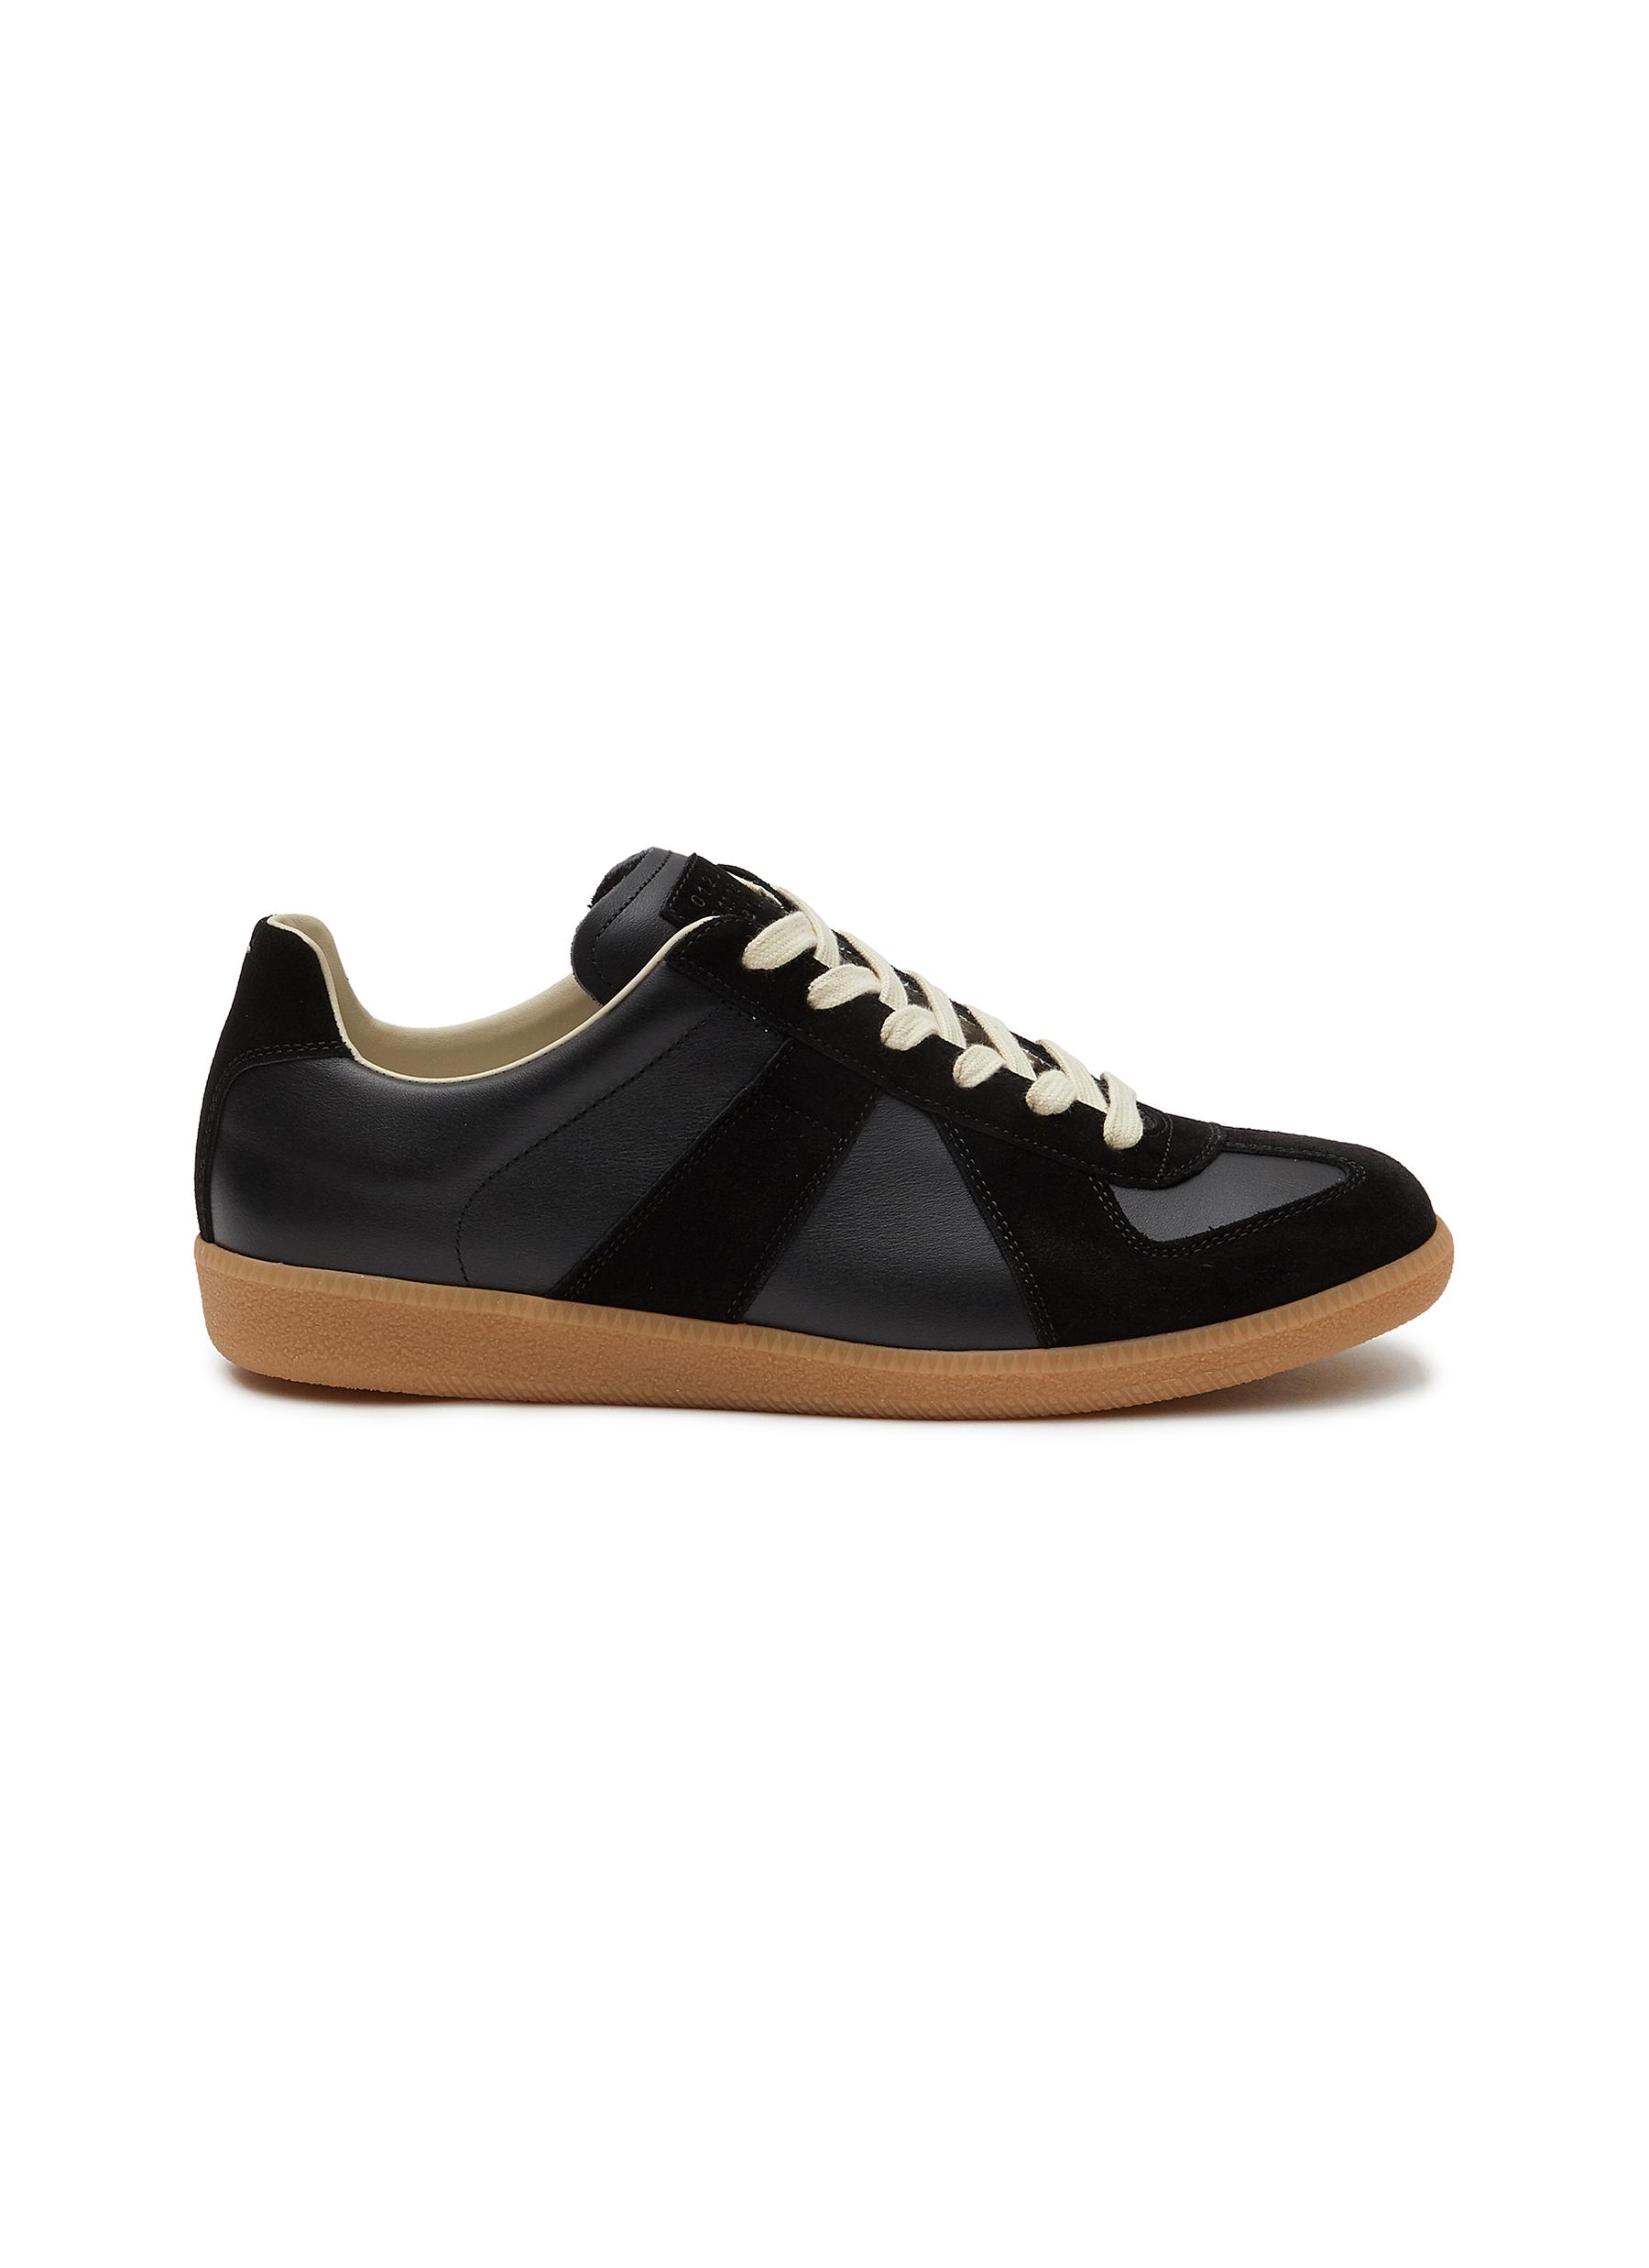 ‘Replica' Leather Low Top Sneakers